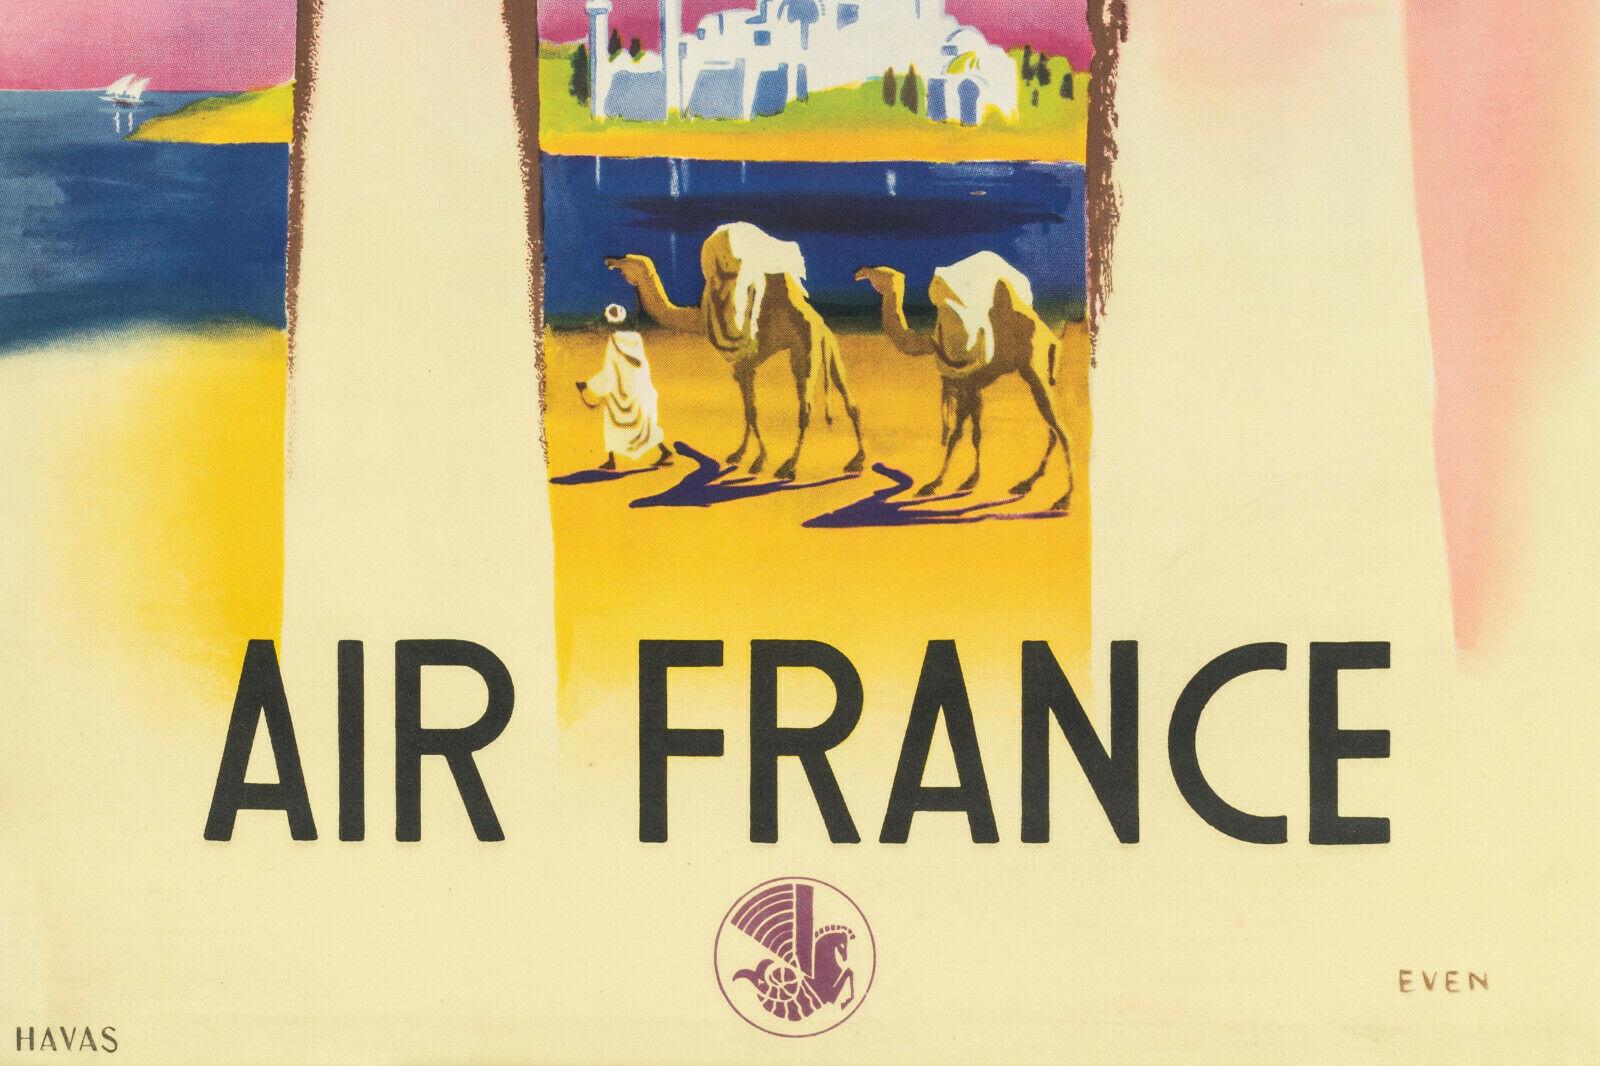 French Jean Even, Original Vintage Airline Poster, Air France, Istanbul, Turkey, 1950